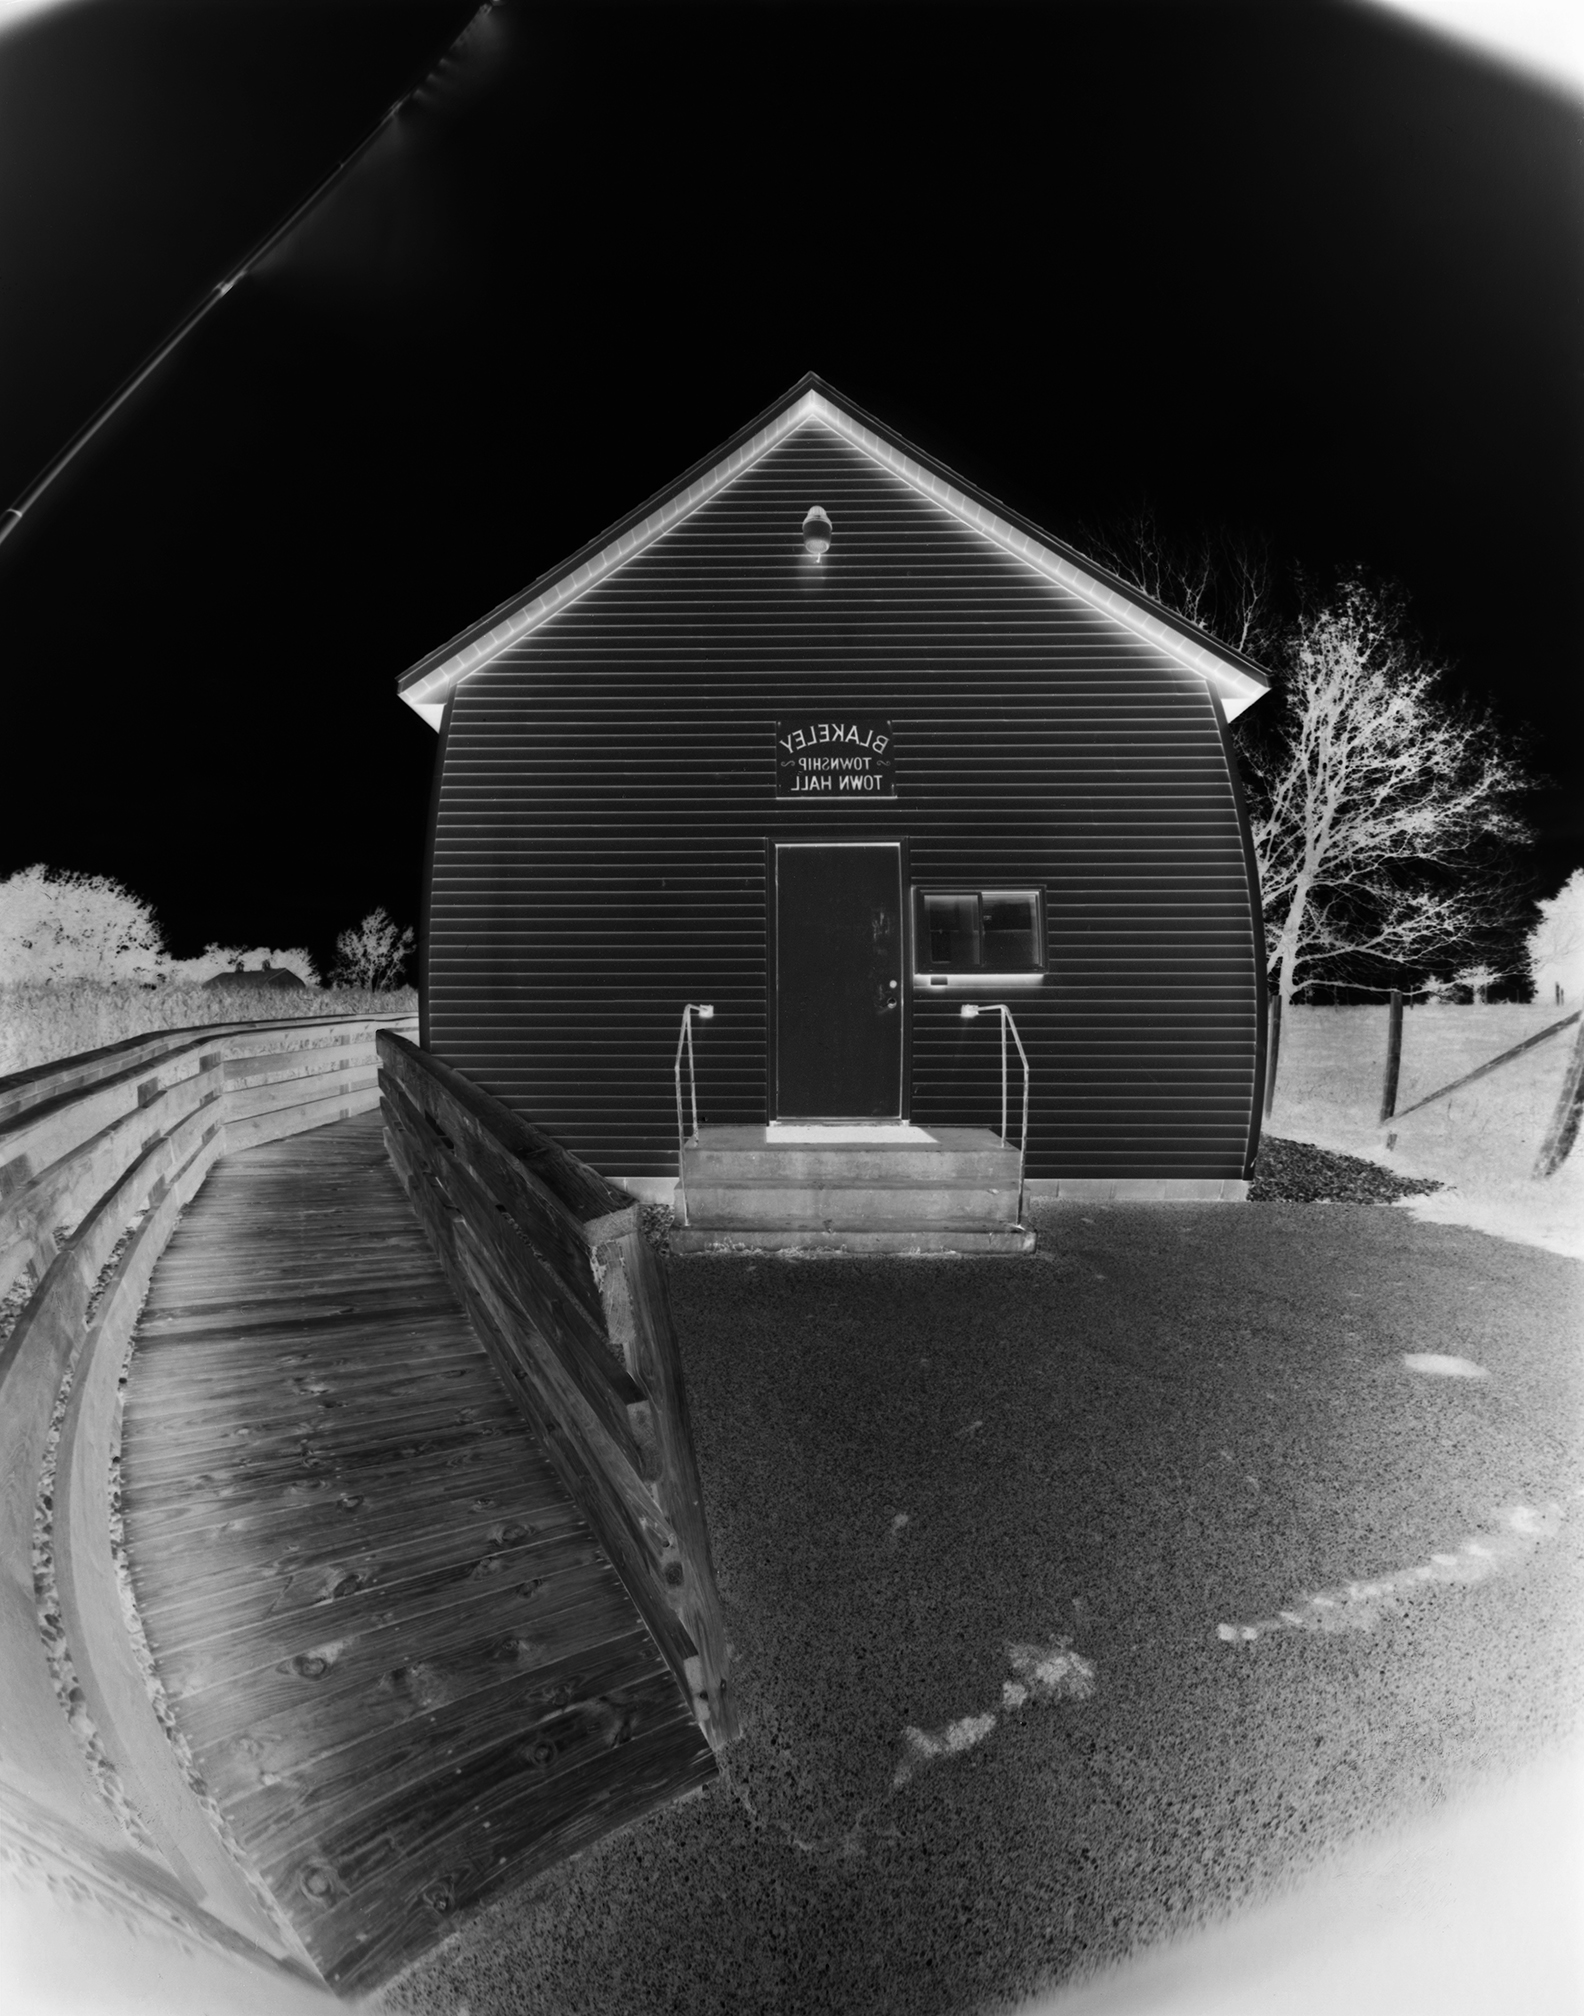 Formal portrait of the Blakeley Township hall in Scott County.